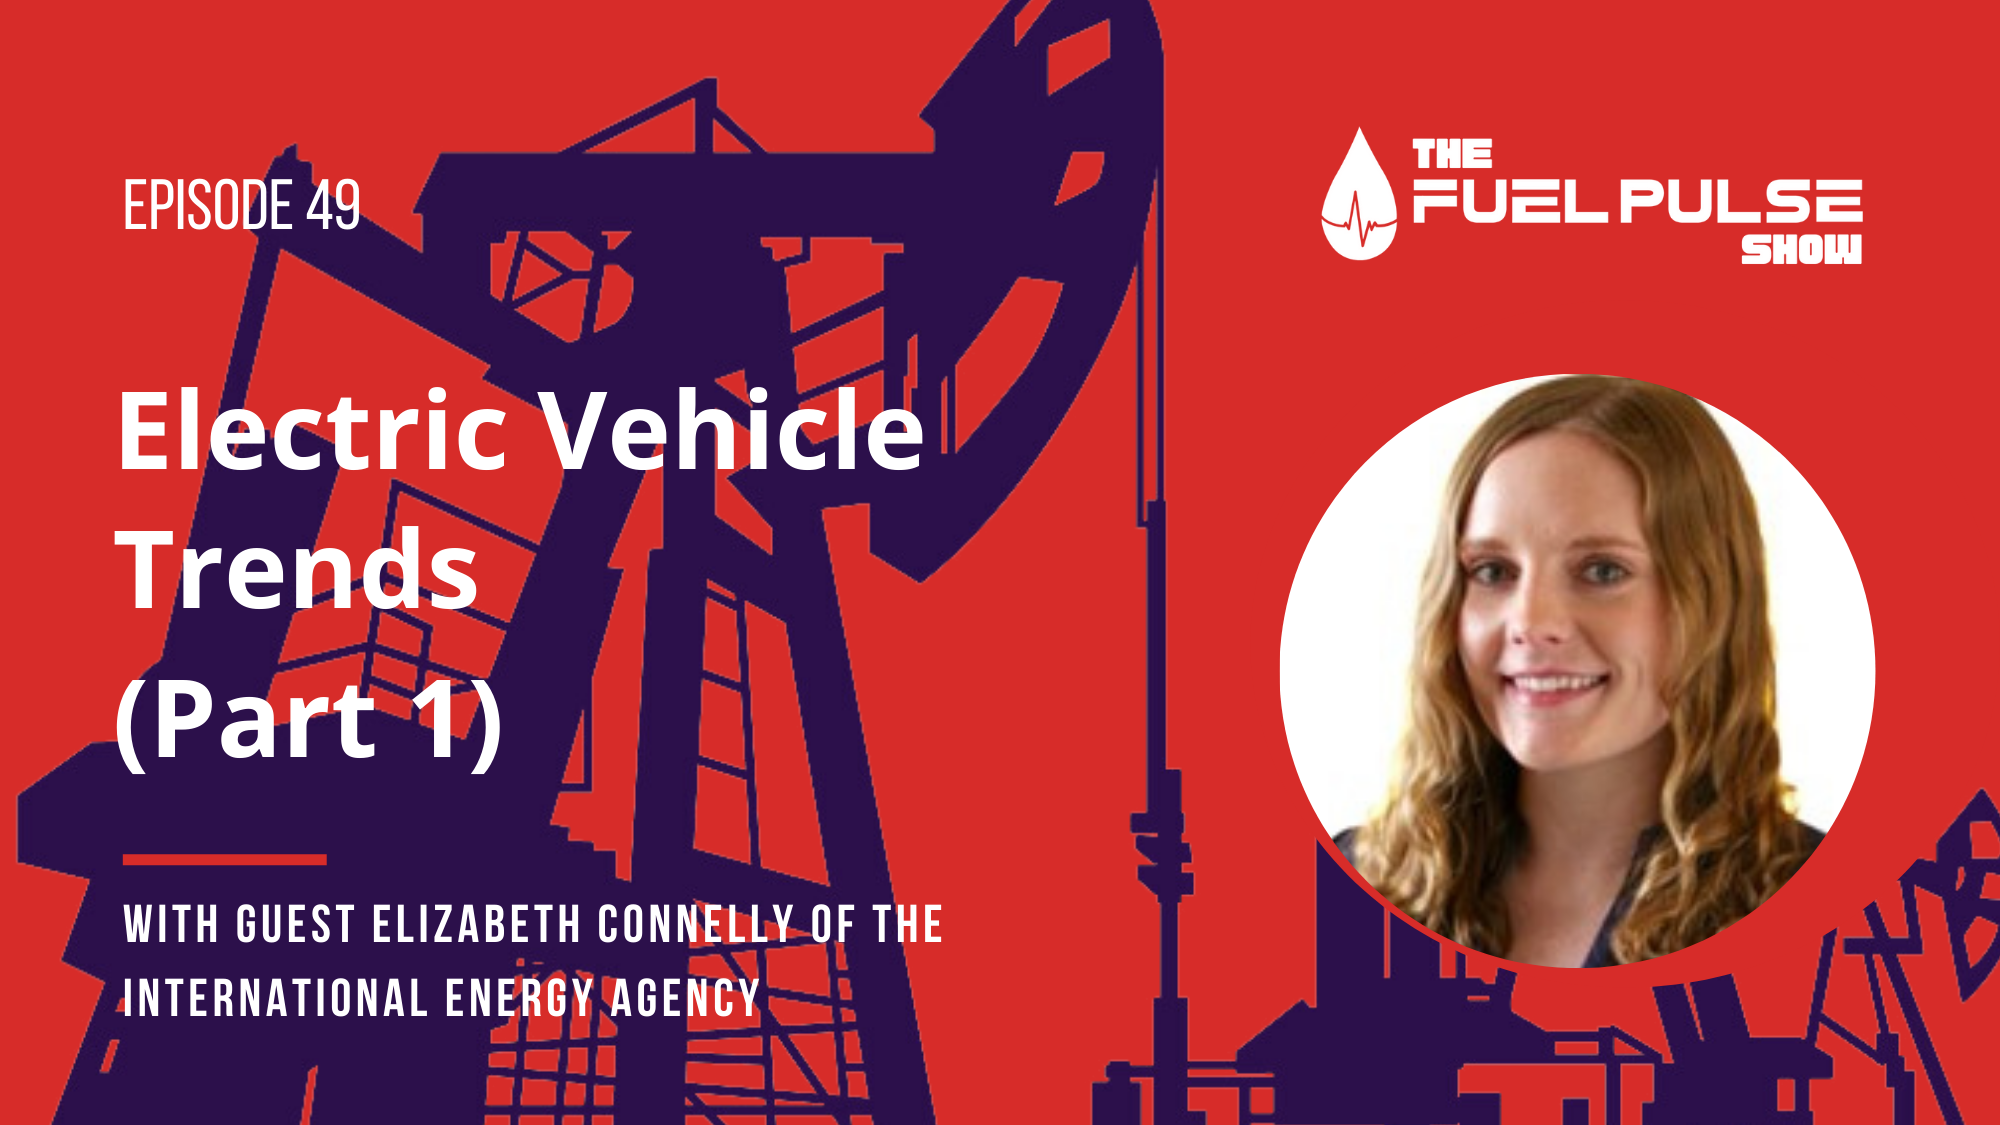 Episode 049 - Electric Vehicle Trends with Elizabeth Connelly - Part 1